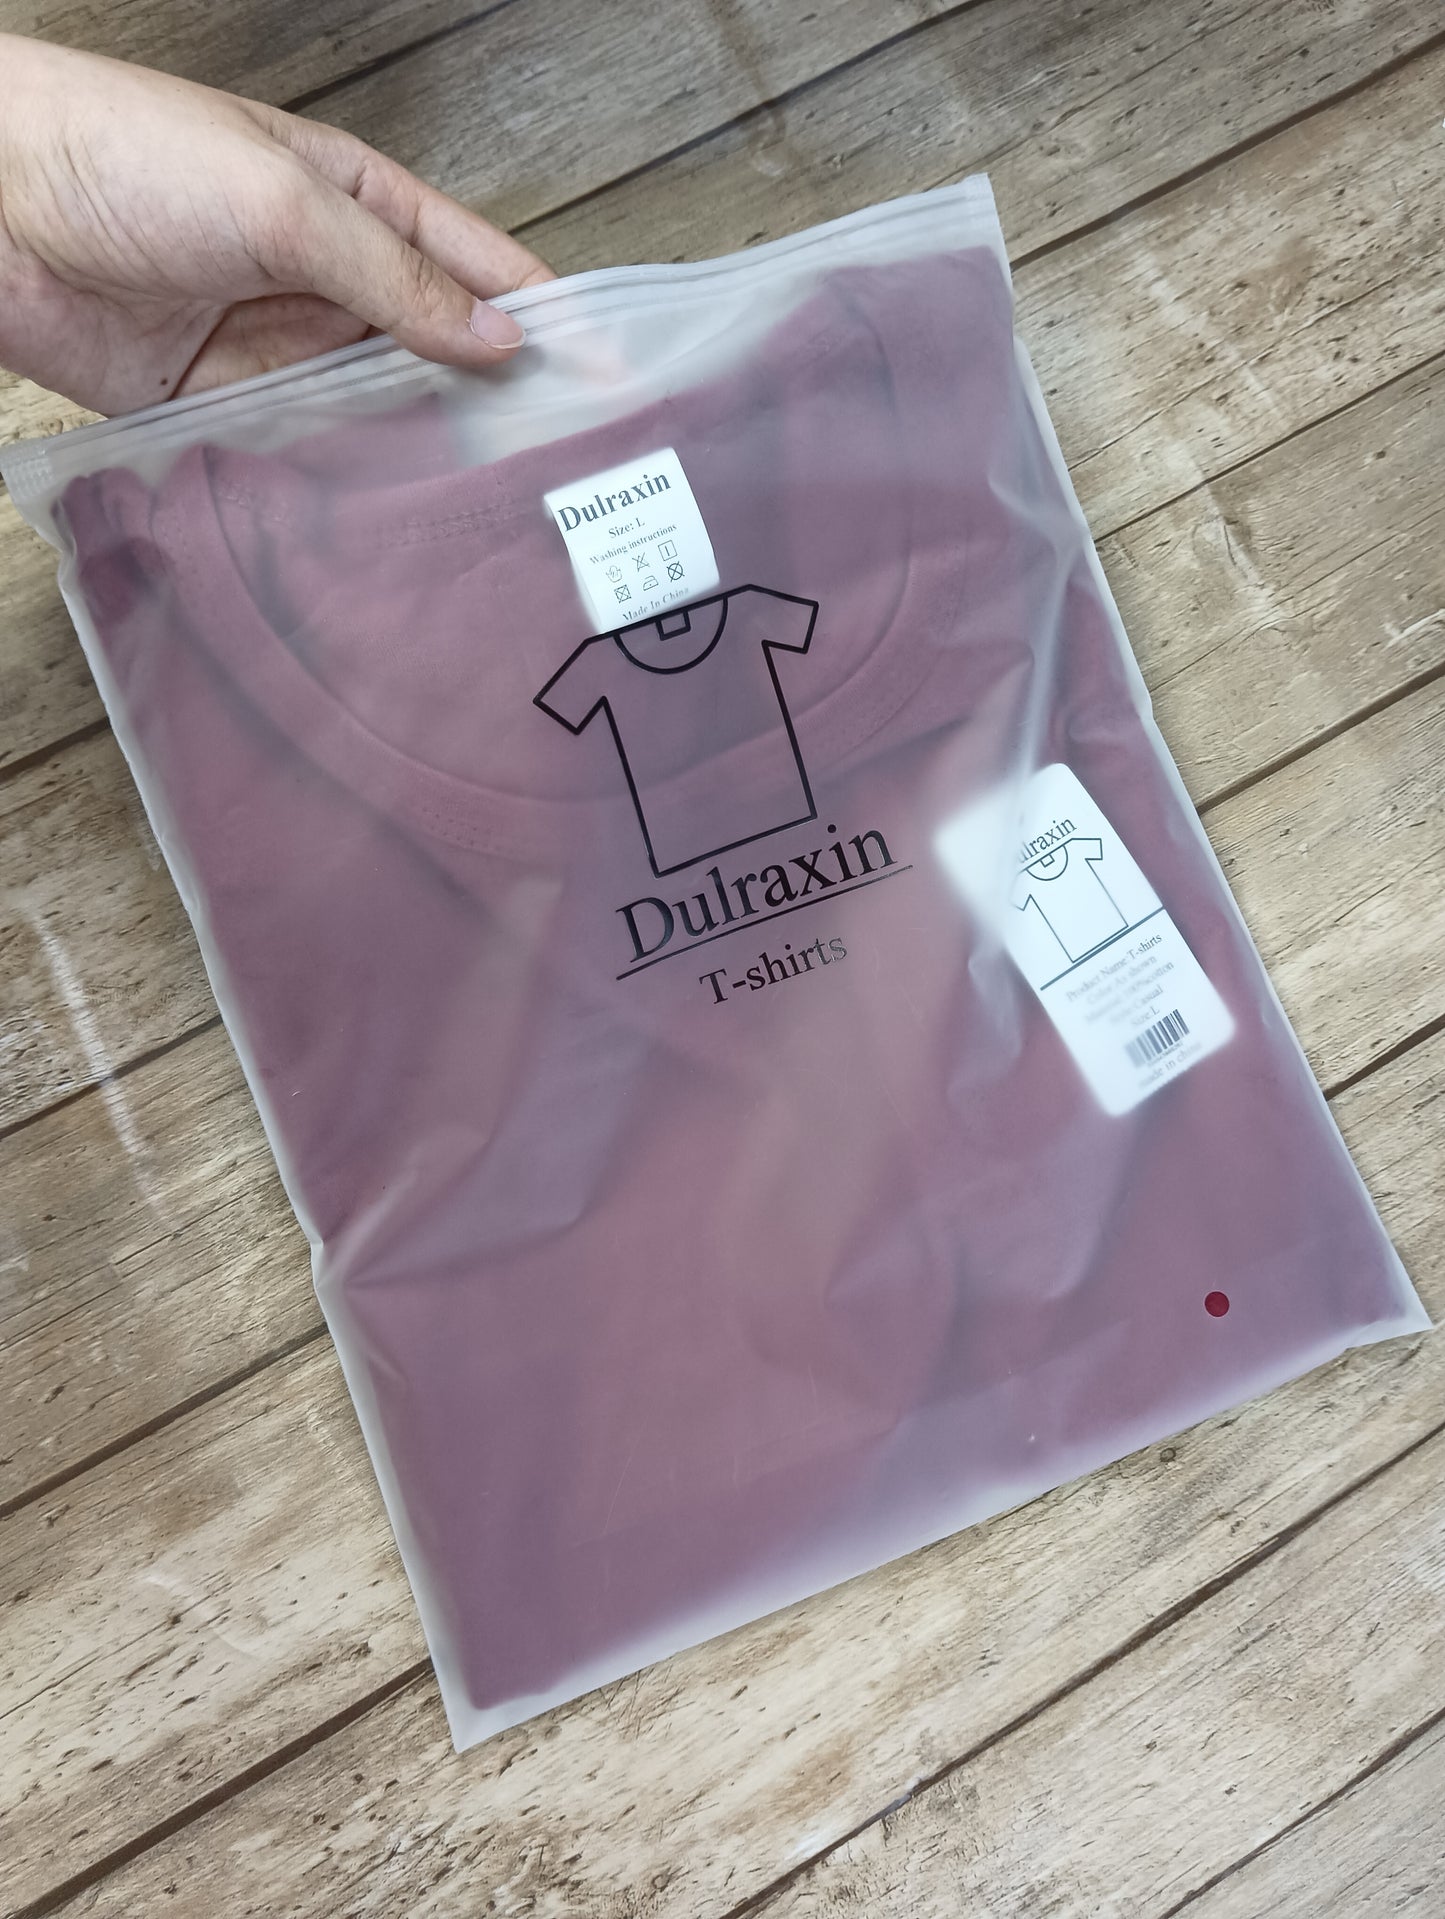 Dulraxin T-shirt cotton round neck solid color bottoming shirt slim half-sleeved hundred casual T-shirt with breathable